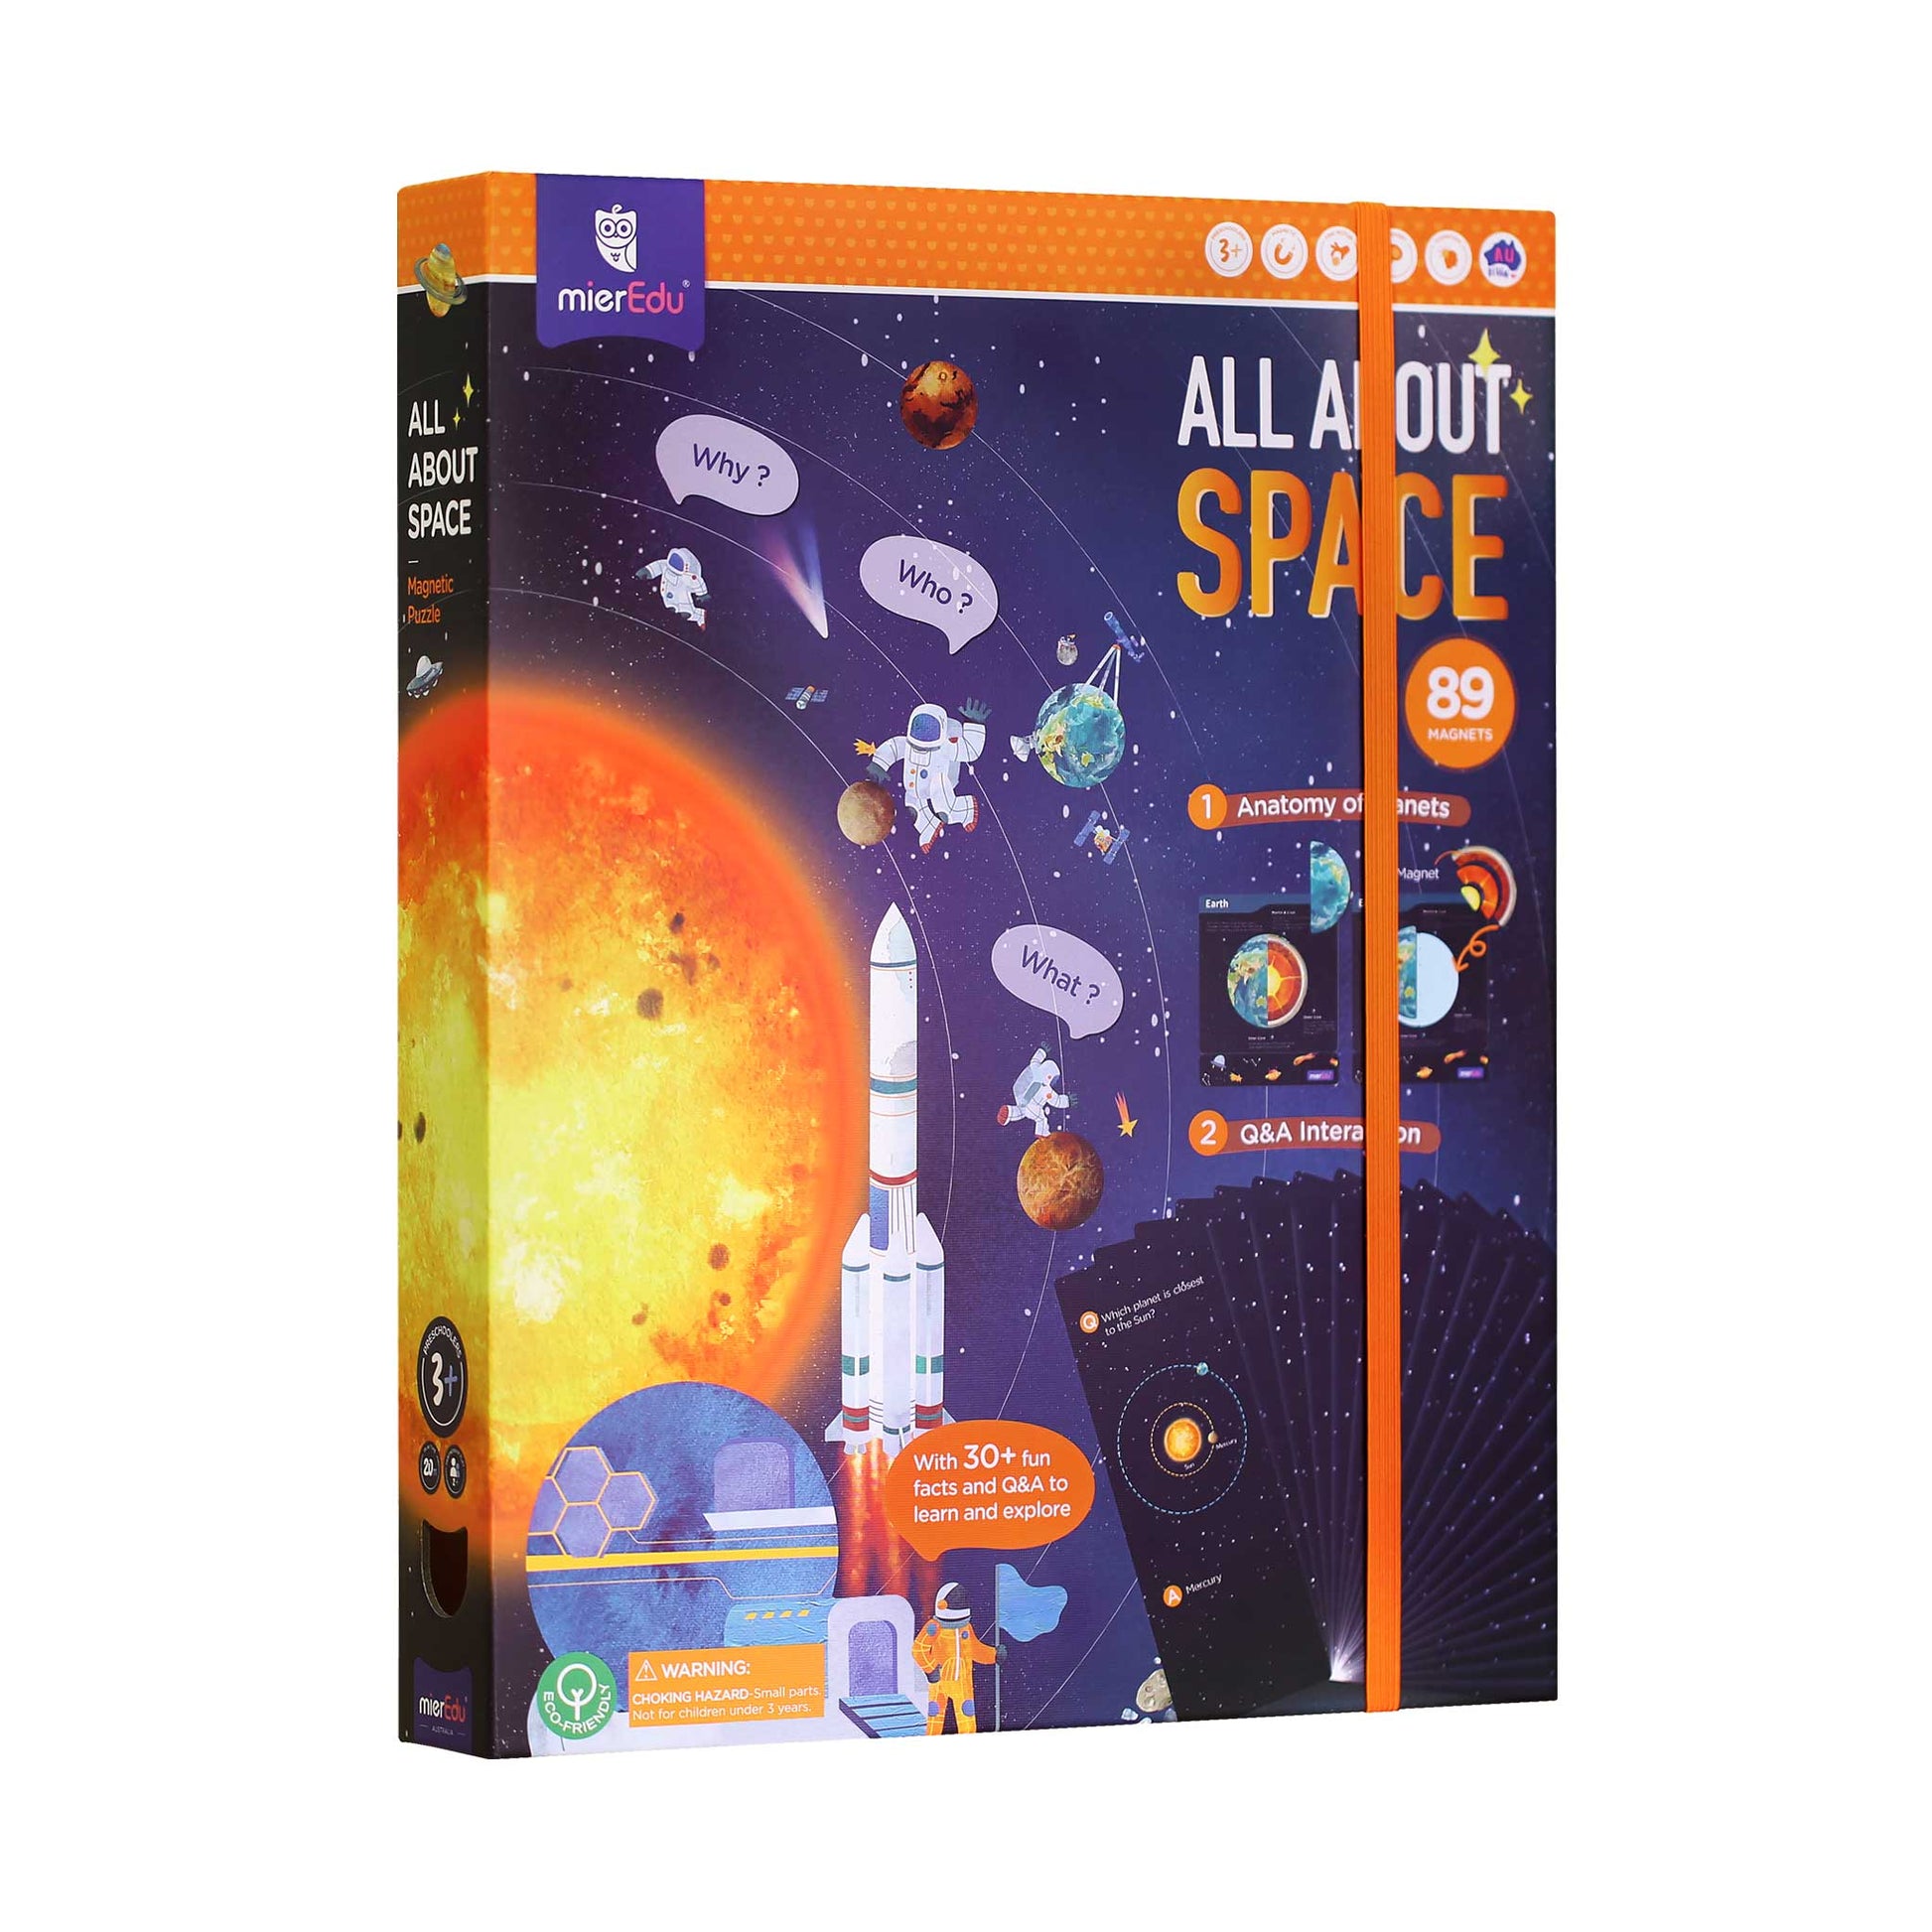 mierEdu All About Space Magnetic Puzzle mierEdu All About Space Magnetic Puzzle 